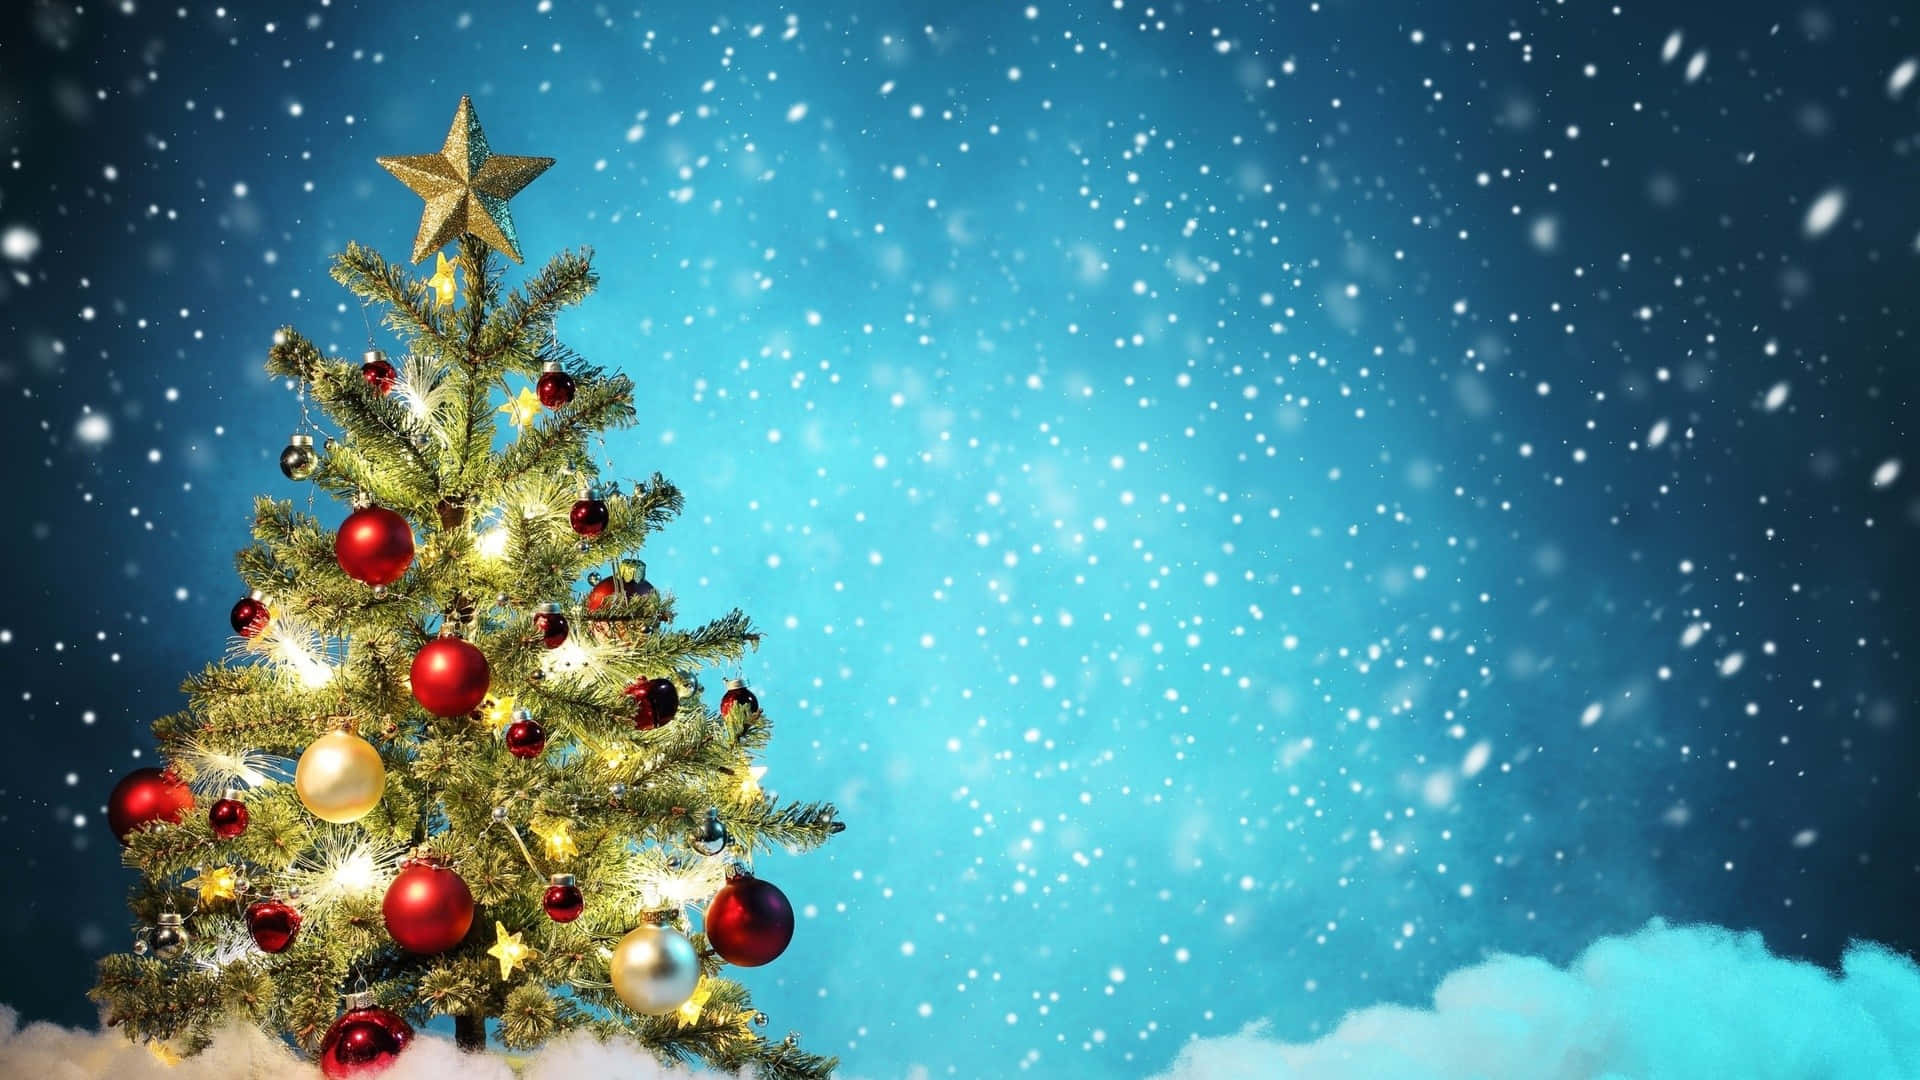 Celebrate The Holidays with a High Resolution Christmas Background